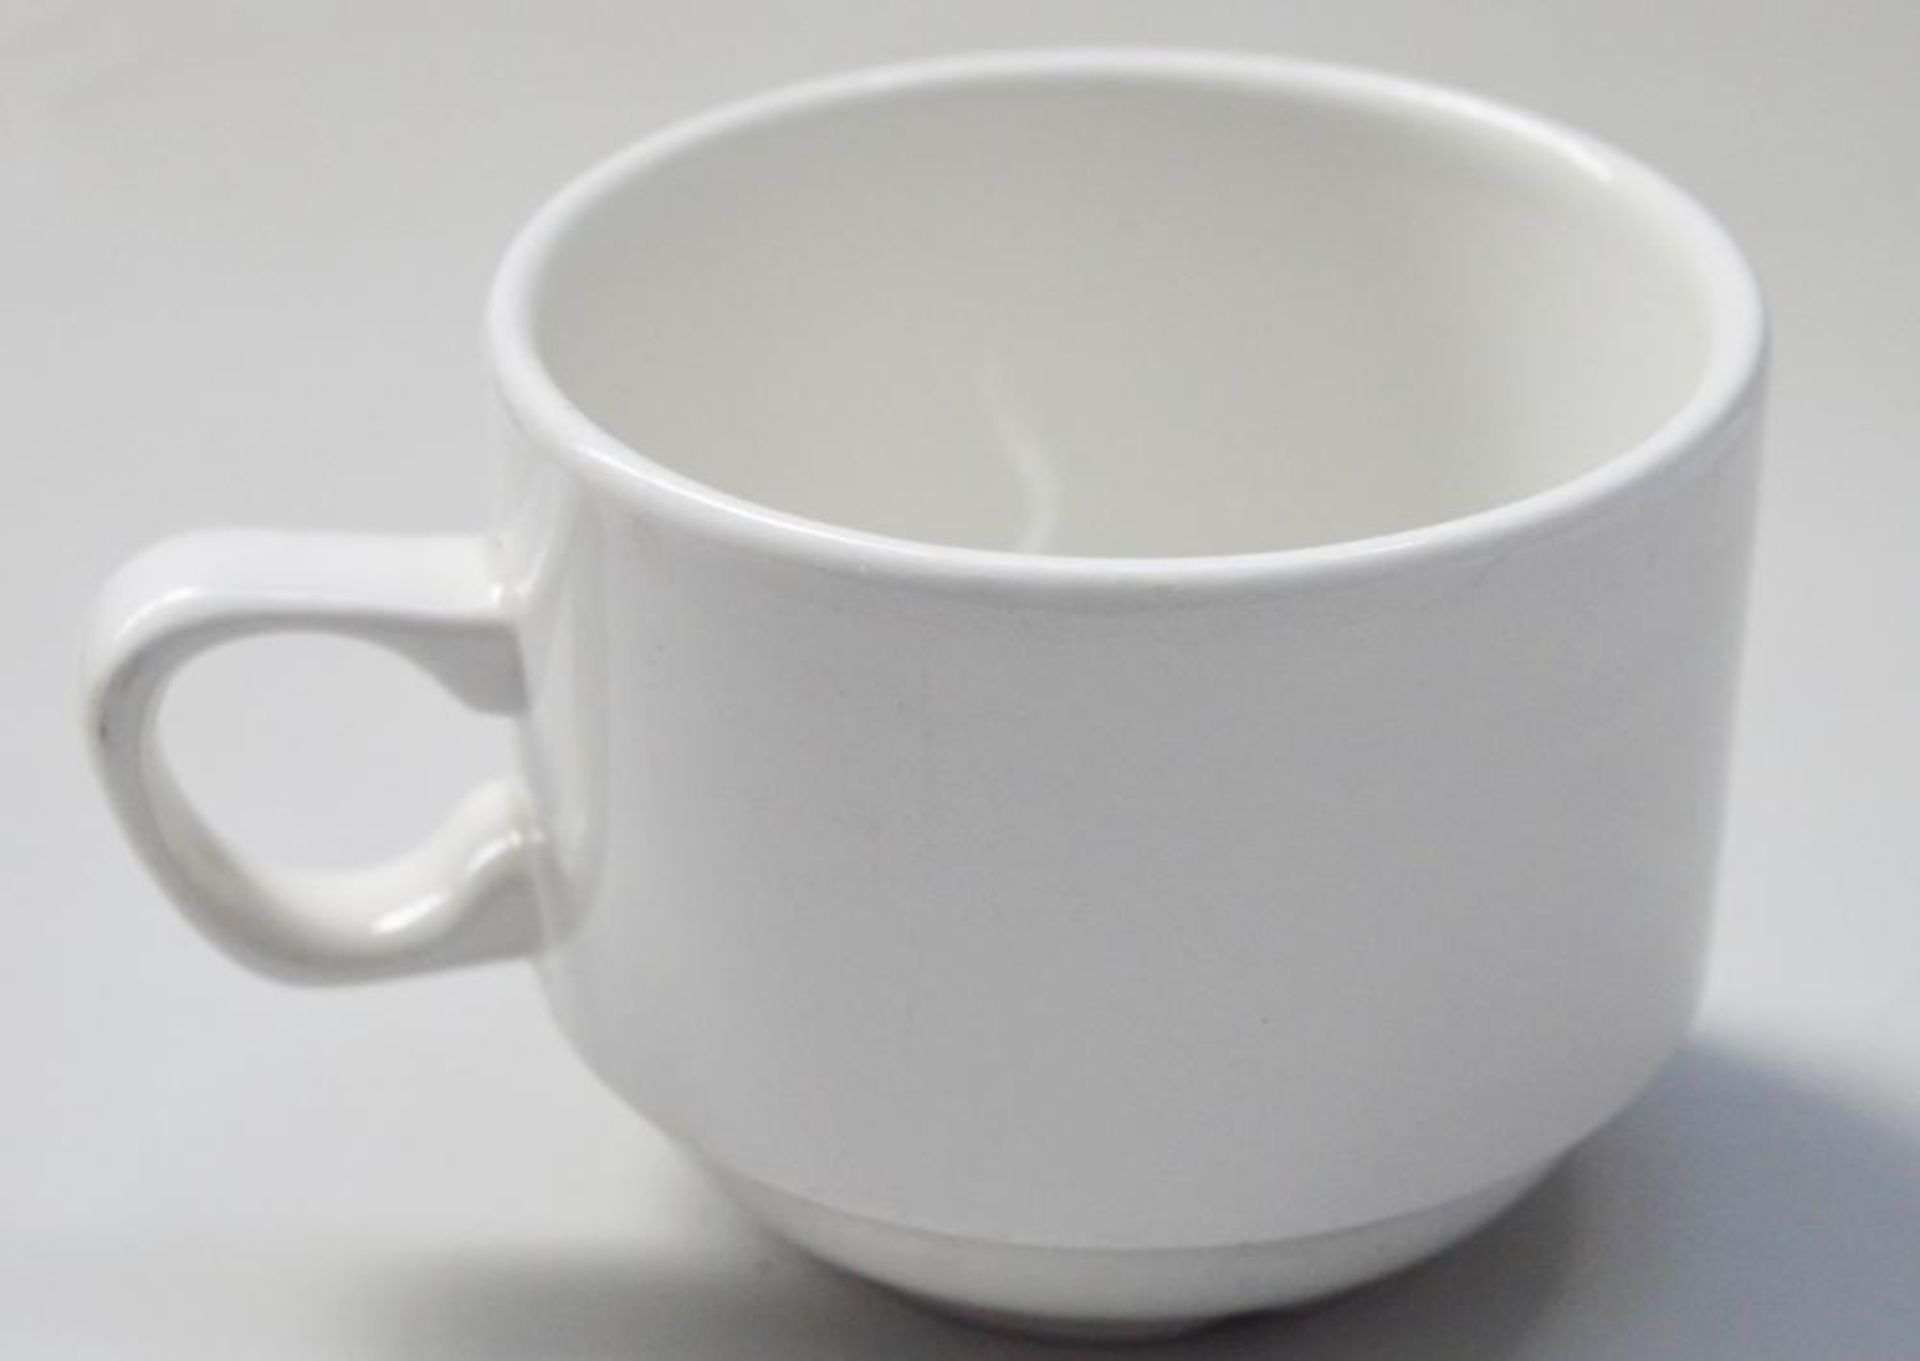 72 x Churchill Porcelain Espresso Cups - Pre-owned in Good Condition - CL232 - Ref JP362 - Location: